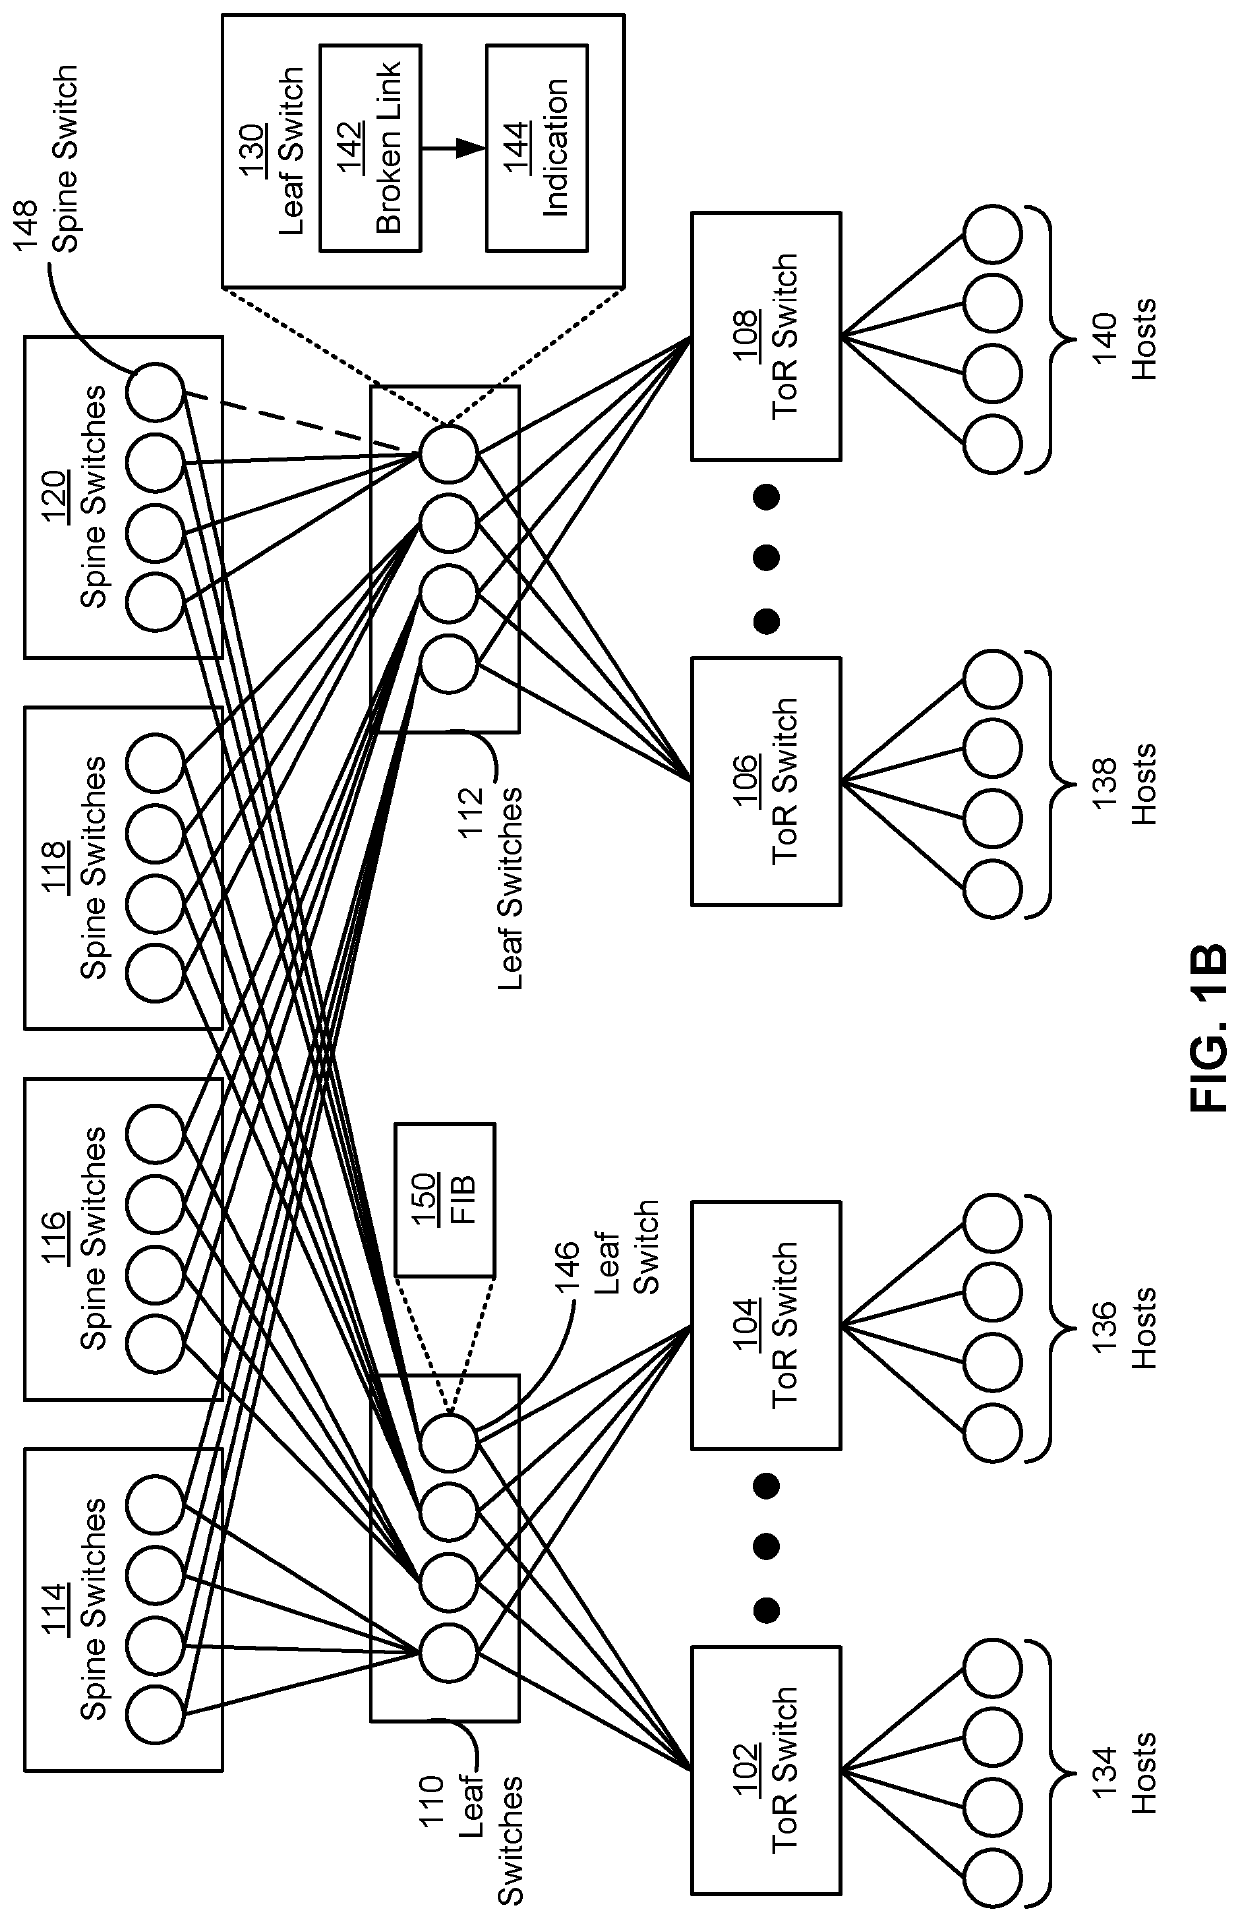 Accelerated convergence in networks with clos topologies